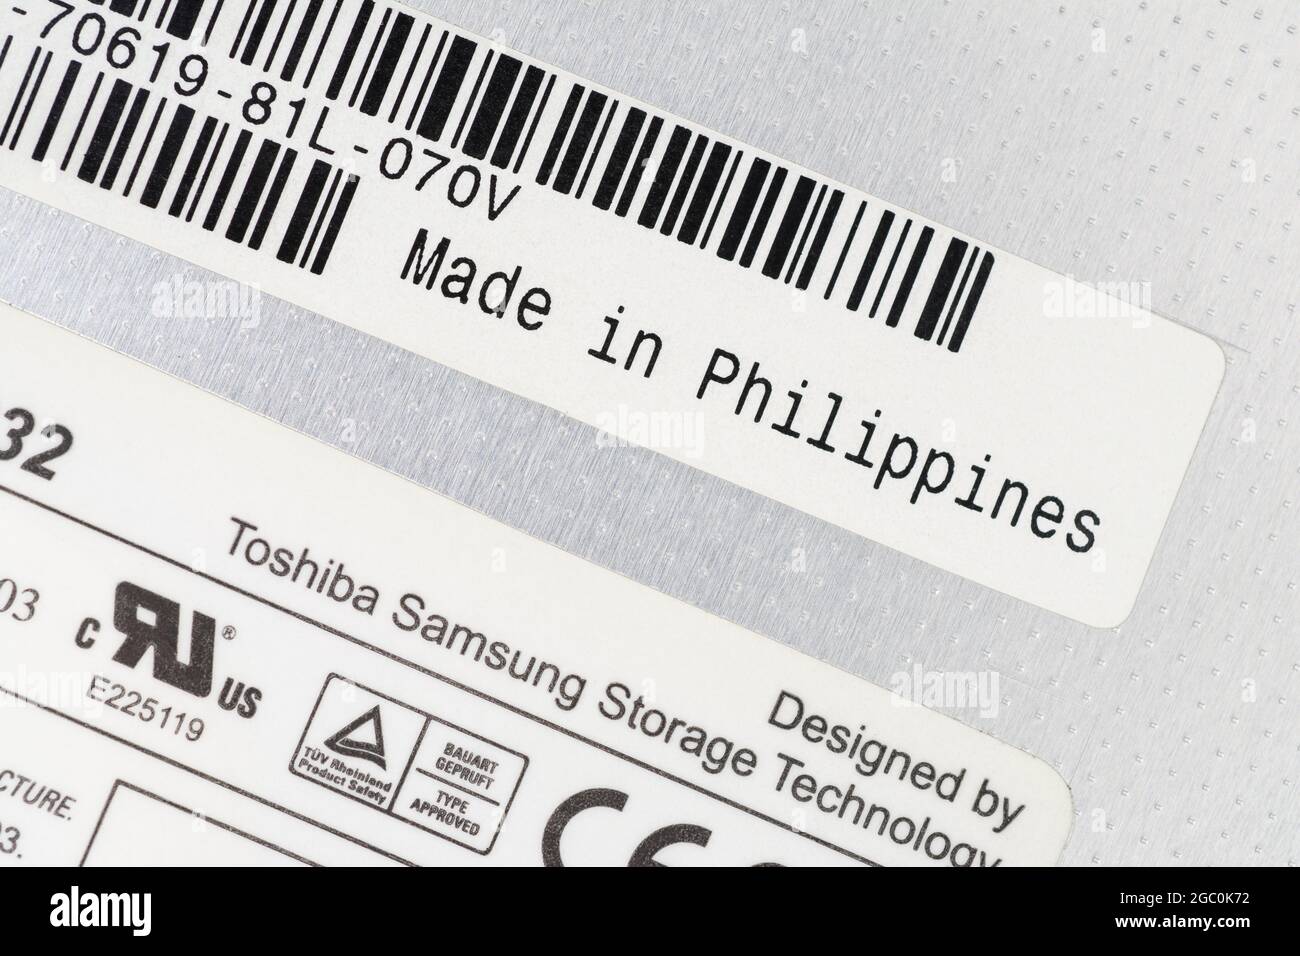 Paper labels on the back of a Toshiba-Samsung made removable laptop DVD Writer unit with made in the Philippines label. For offshoring parts. Stock Photo